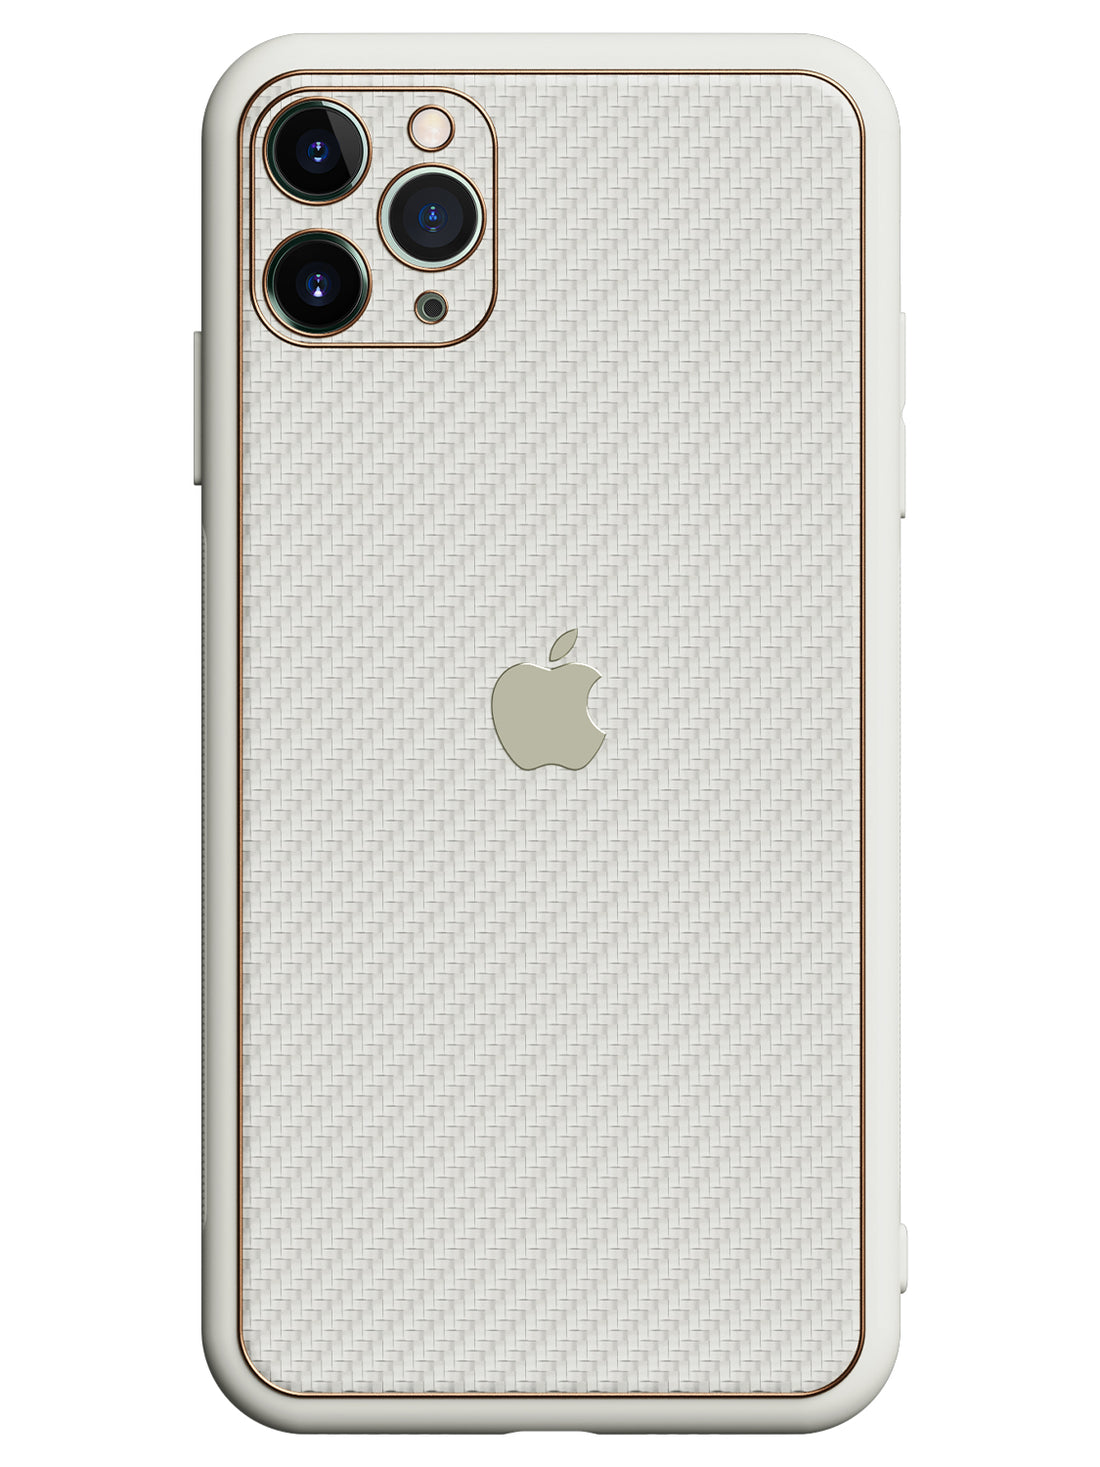 Carbon Leather Chrome Case - iPhone 11 Pro Max (White)